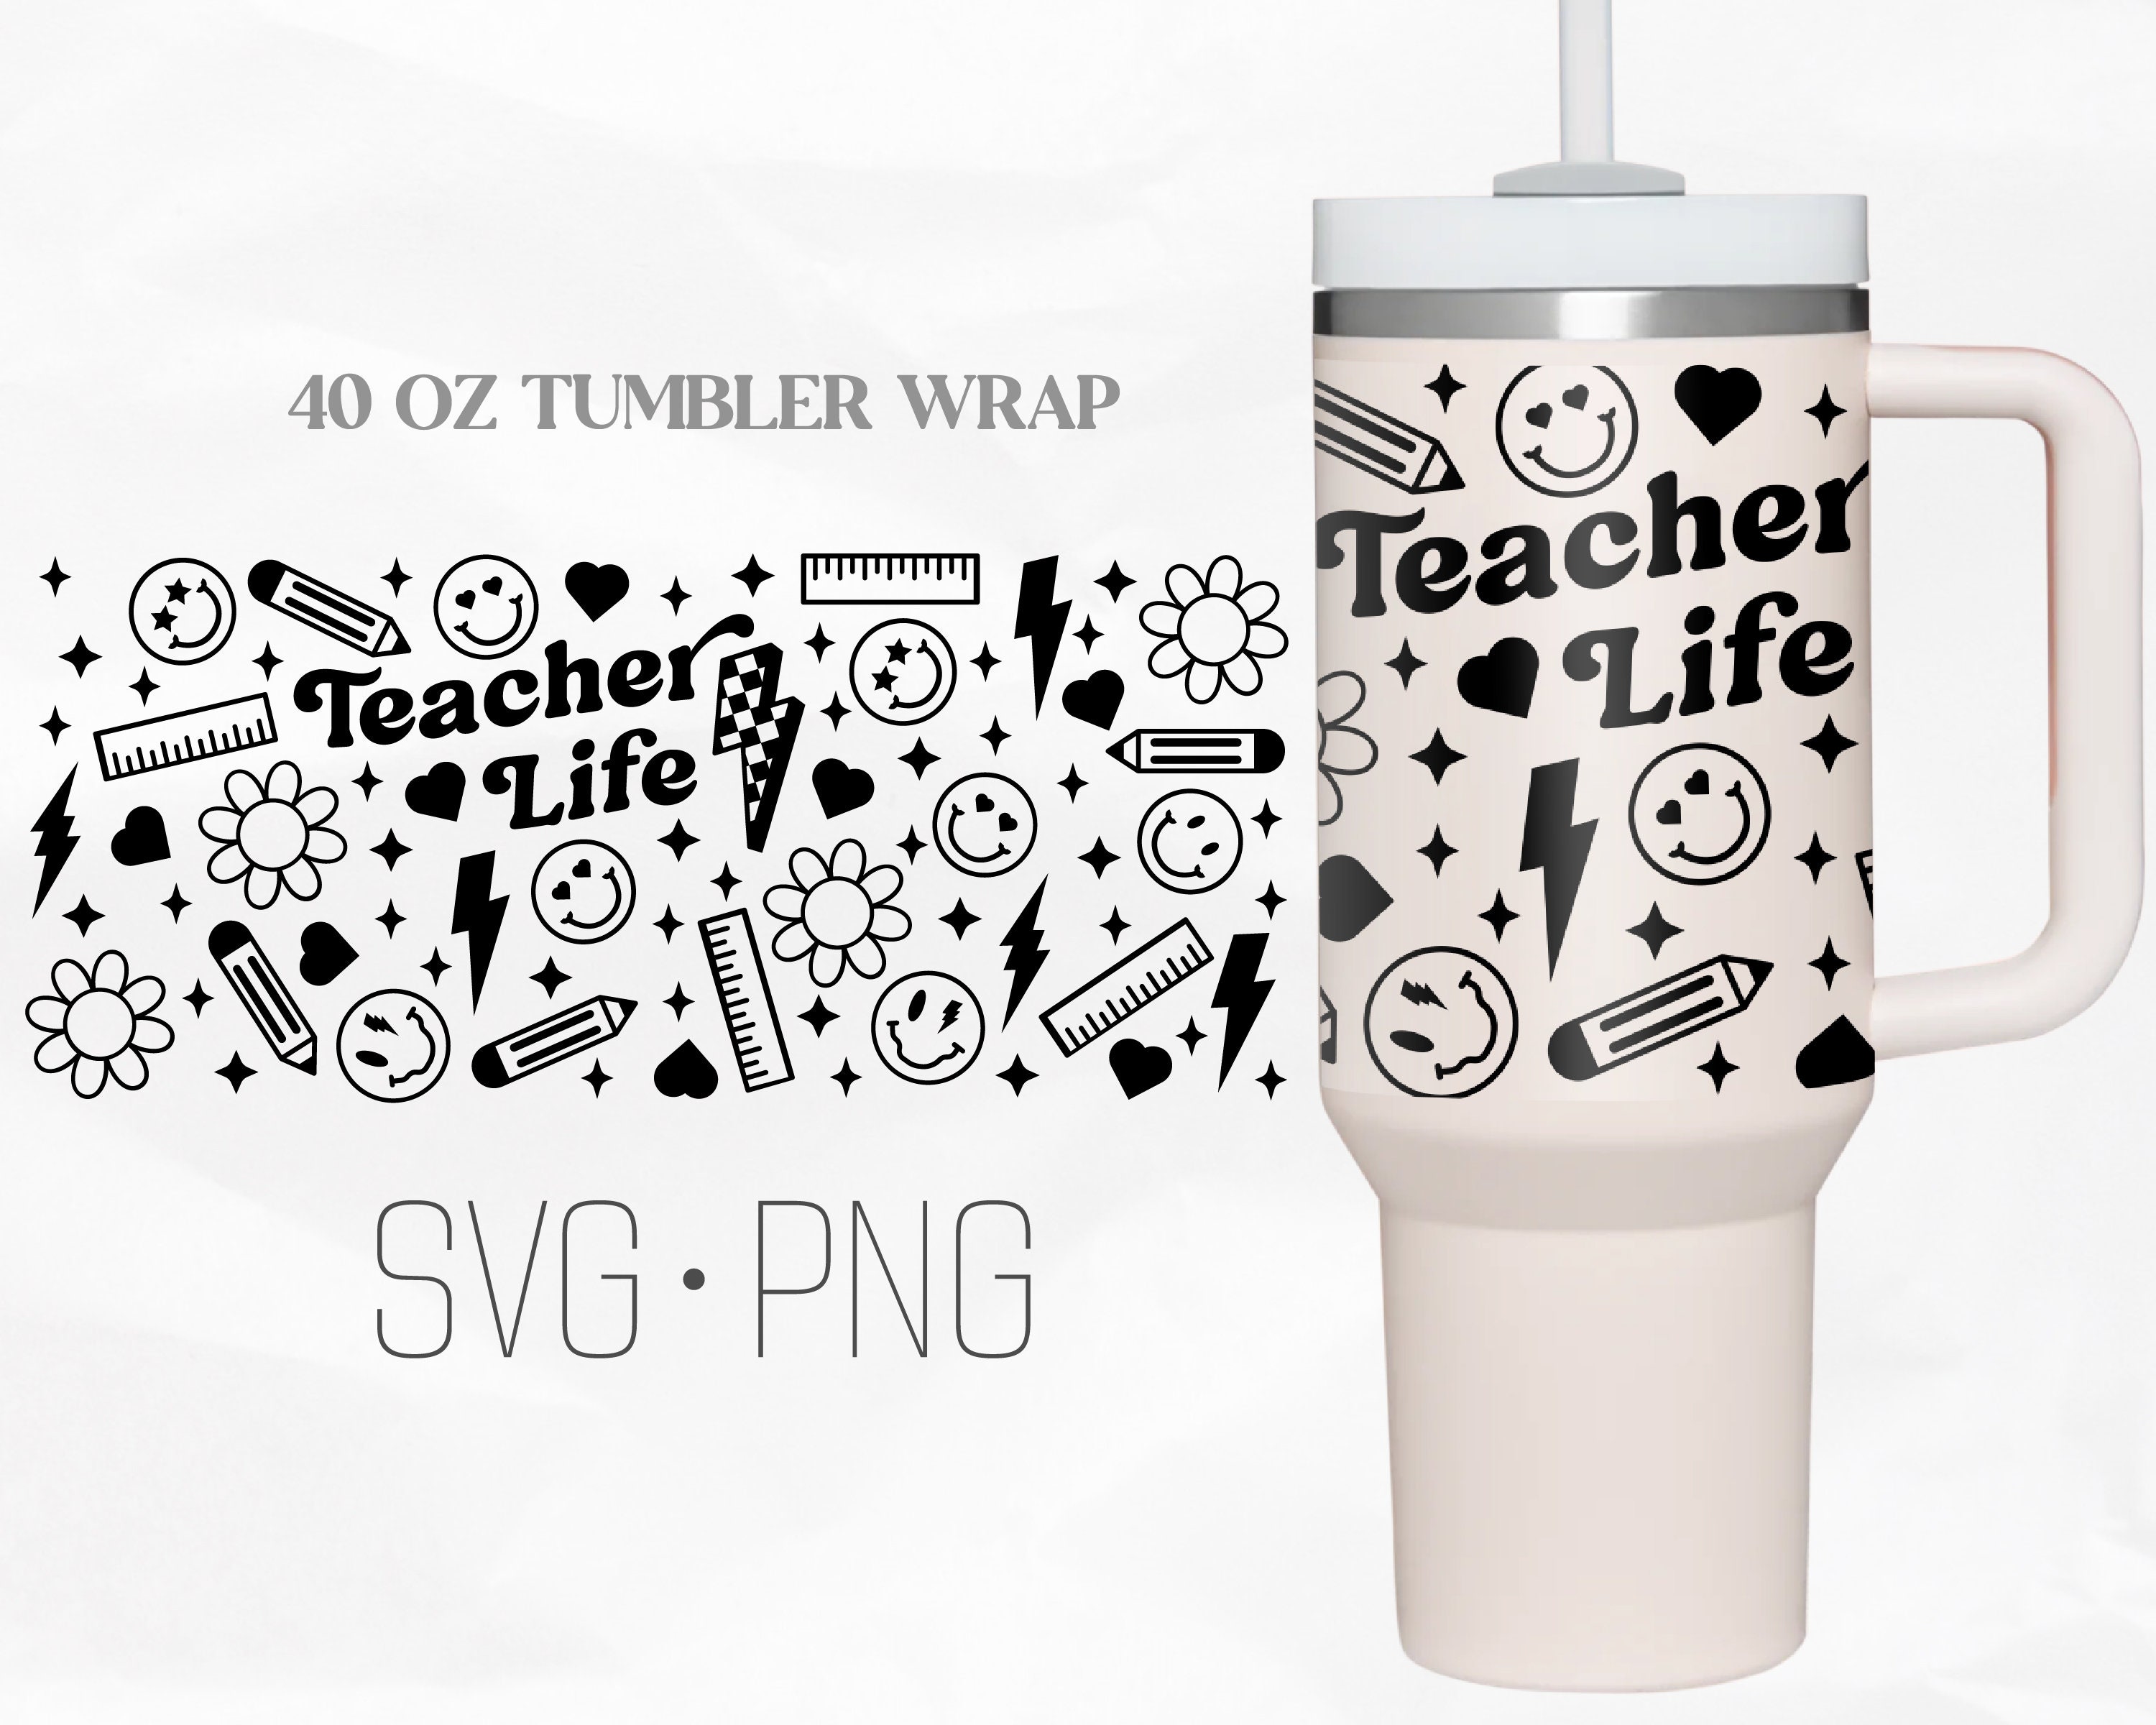 Stanley cup flowers decal, retro groovy stanley tumbler